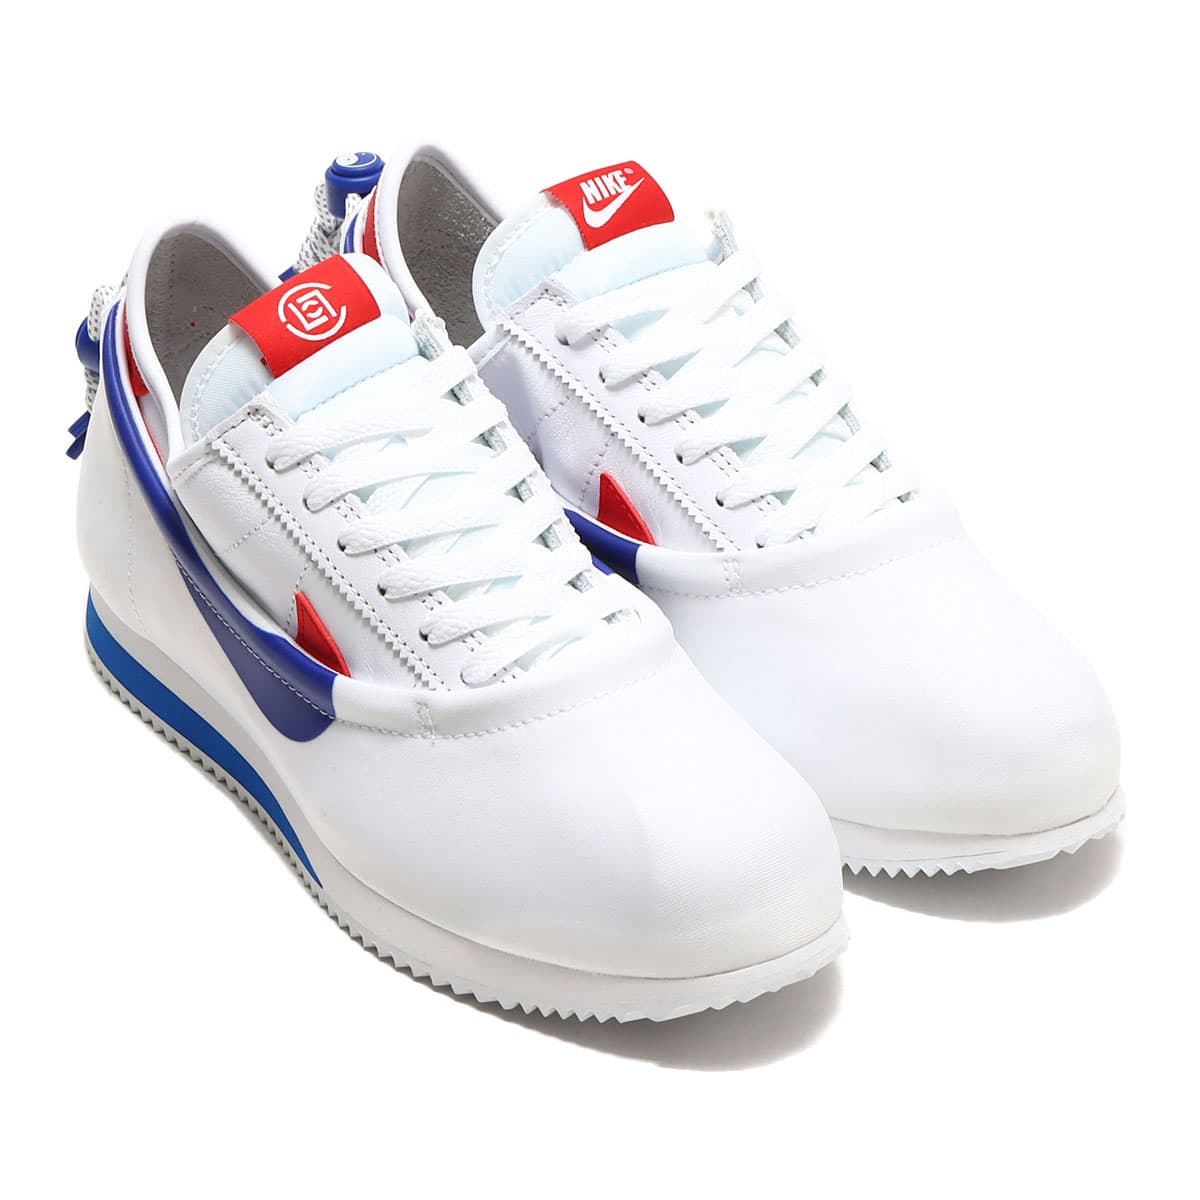 CLOT × Nike Cortez White and Game Royal